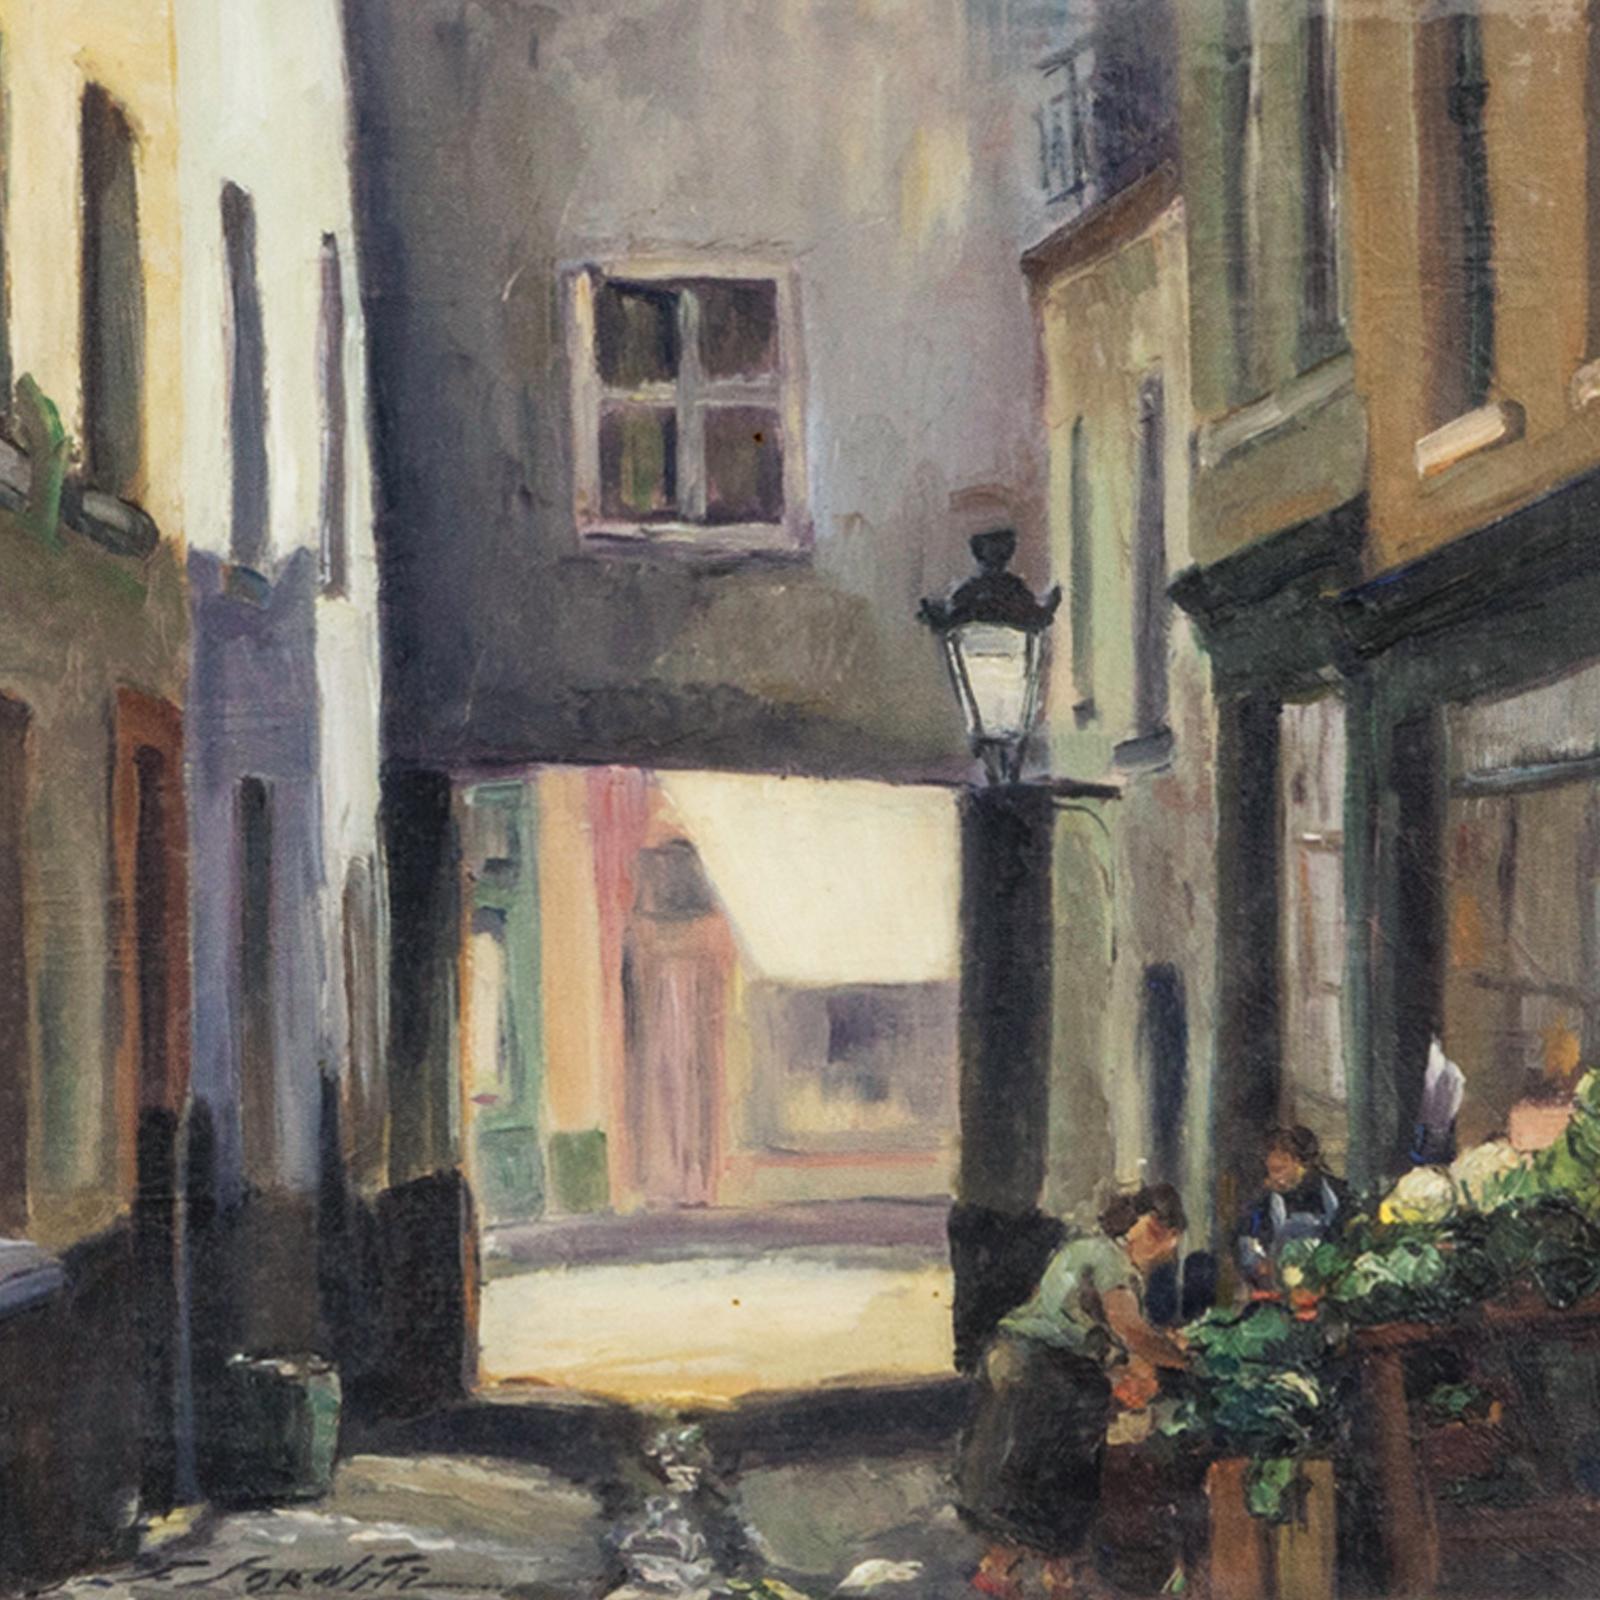 Oil painting capturing a narrow street or alleyway in Brussels, adorned with houses and a small grocery stand featuring two ladies.

The artwork is signed by F. Jorwitz, Ferdinand Jorwitz being a Belgian painter (1897 - 1979) known for his